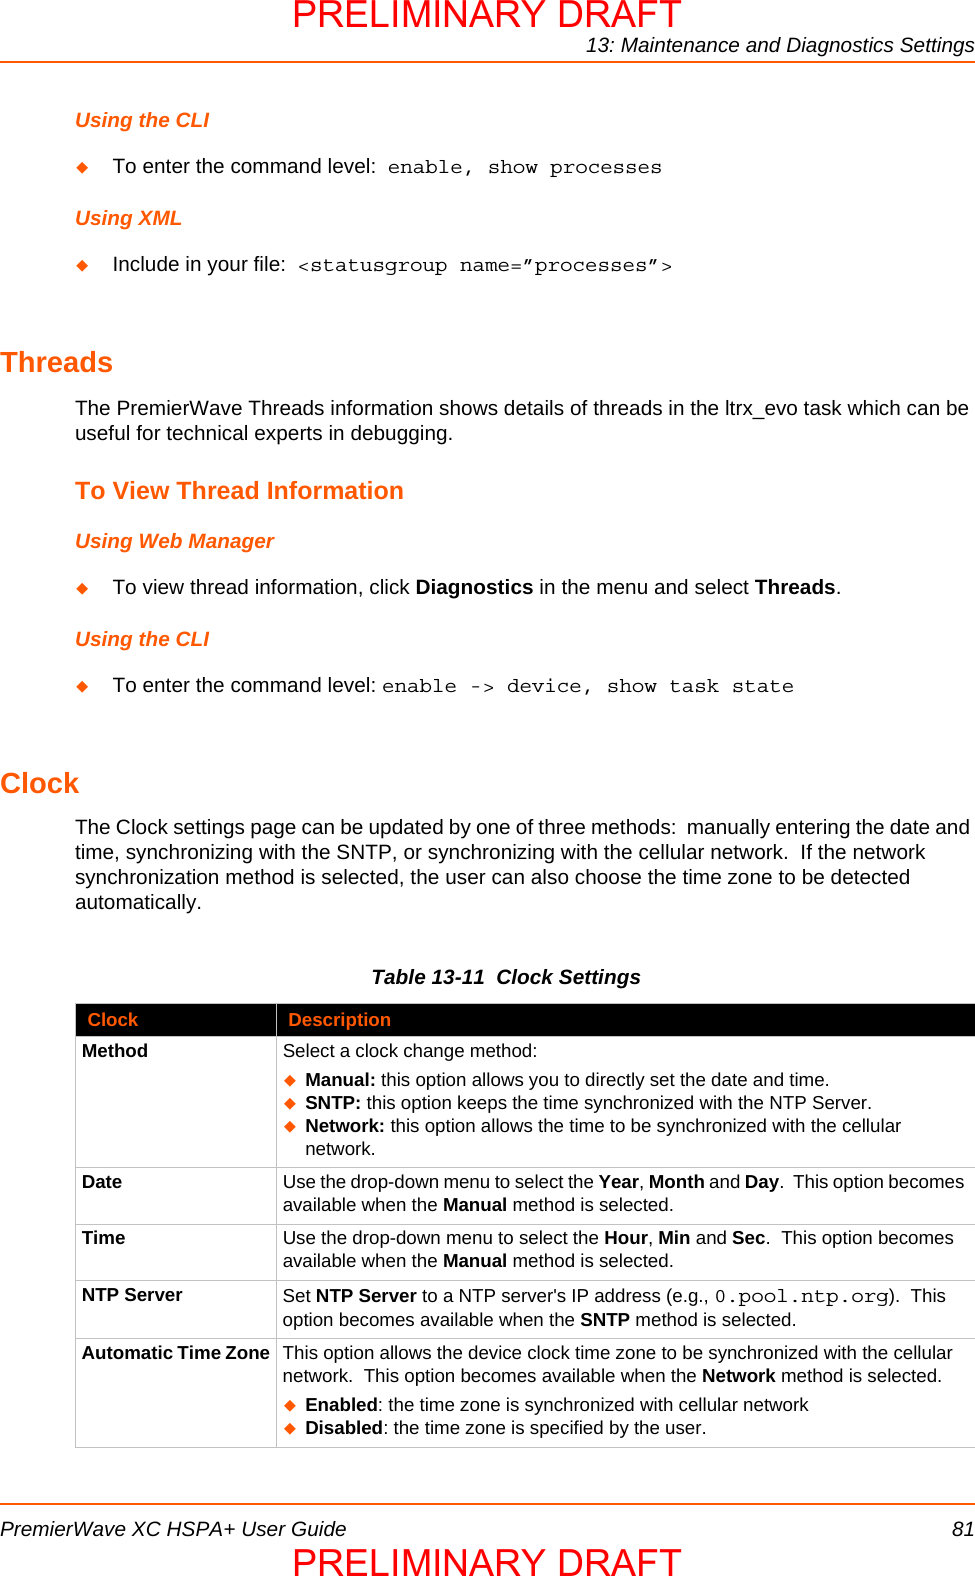 13: Maintenance and Diagnostics SettingsPremierWave XC HSPA+ User Guide 81Using the CLITo enter the command level:  enable, show processesUsing XMLInclude in your file:  &lt;statusgroup name=”processes”&gt;ThreadsThe PremierWave Threads information shows details of threads in the ltrx_evo task which can be useful for technical experts in debugging.To View Thread InformationUsing Web ManagerTo view thread information, click Diagnostics in the menu and select Threads.Using the CLITo enter the command level: enable -&gt; device, show task stateClockThe Clock settings page can be updated by one of three methods:  manually entering the date and time, synchronizing with the SNTP, or synchronizing with the cellular network.  If the network synchronization method is selected, the user can also choose the time zone to be detected automatically.Table 13-11  Clock SettingsClock DescriptionMethod Select a clock change method:Manual: this option allows you to directly set the date and time.SNTP: this option keeps the time synchronized with the NTP Server. Network: this option allows the time to be synchronized with the cellular network.Date Use the drop-down menu to select the Year, Month and Day.  This option becomes available when the Manual method is selected.Time Use the drop-down menu to select the Hour, Min and Sec.  This option becomes available when the Manual method is selected.NTP Server Set NTP Server to a NTP server&apos;s IP address (e.g., 0.pool.ntp.org).  This option becomes available when the SNTP method is selected.Automatic Time Zone This option allows the device clock time zone to be synchronized with the cellular network.  This option becomes available when the Network method is selected.Enabled: the time zone is synchronized with cellular networkDisabled: the time zone is specified by the user.PRELIMINARY DRAFTPRELIMINARY DRAFT